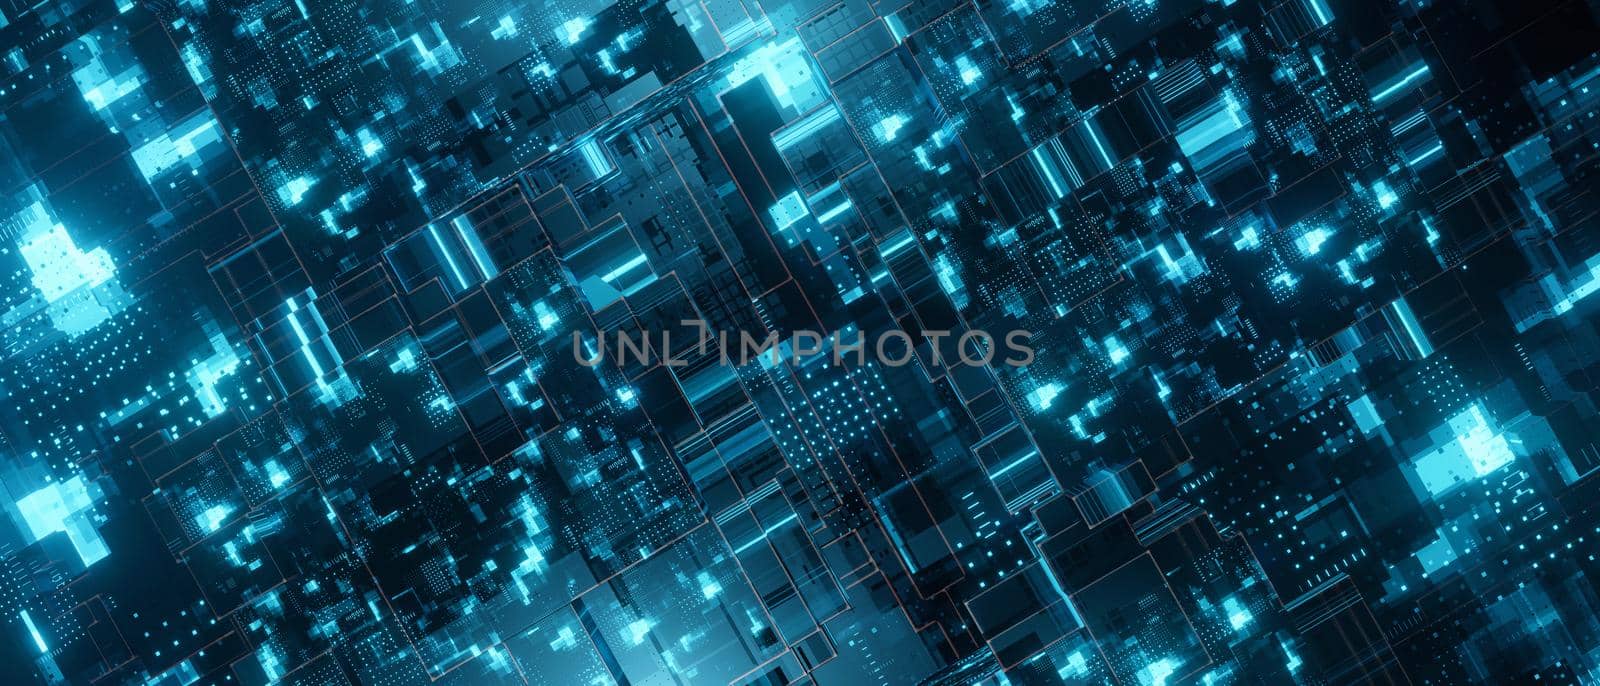 Abstract Shiny Futuristic Electronics Processor Or Large Scale PCB Circuit Like Pattern Surface Board Digital Light Blue Turquoise Banner Background Concepts 3D Illustration by yay_lmrb